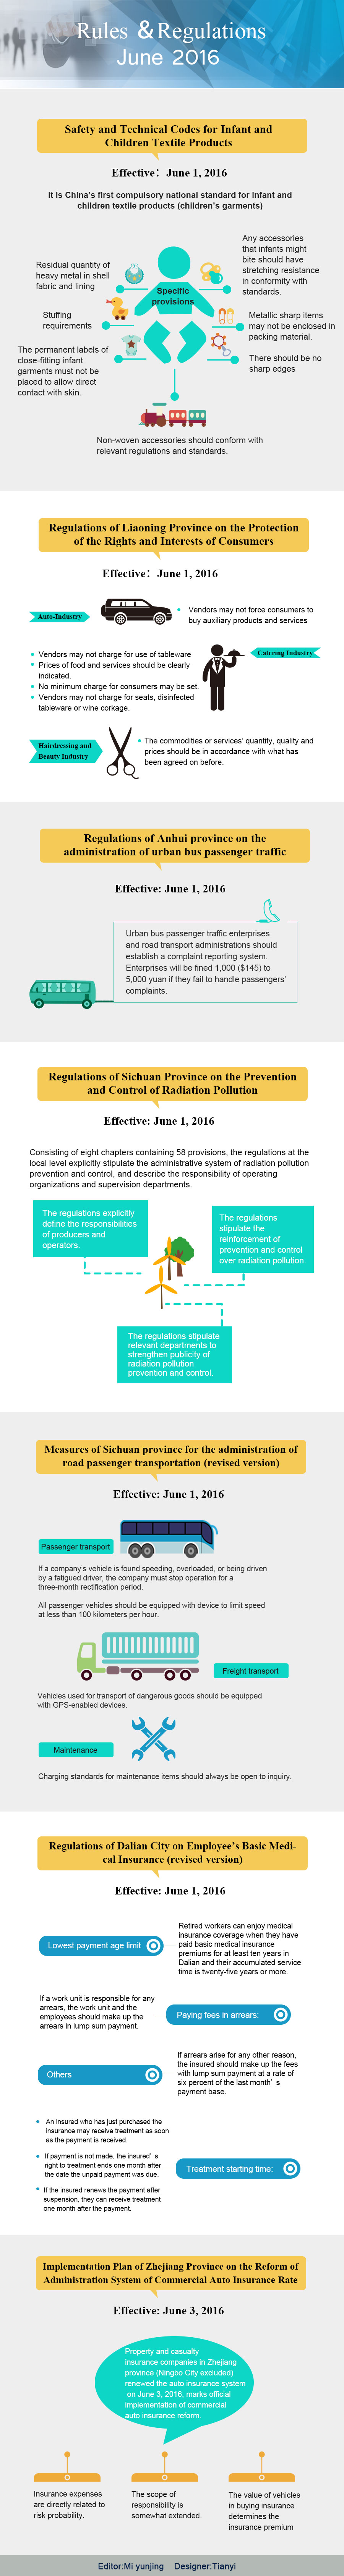 New Laws and Regulations June 2016